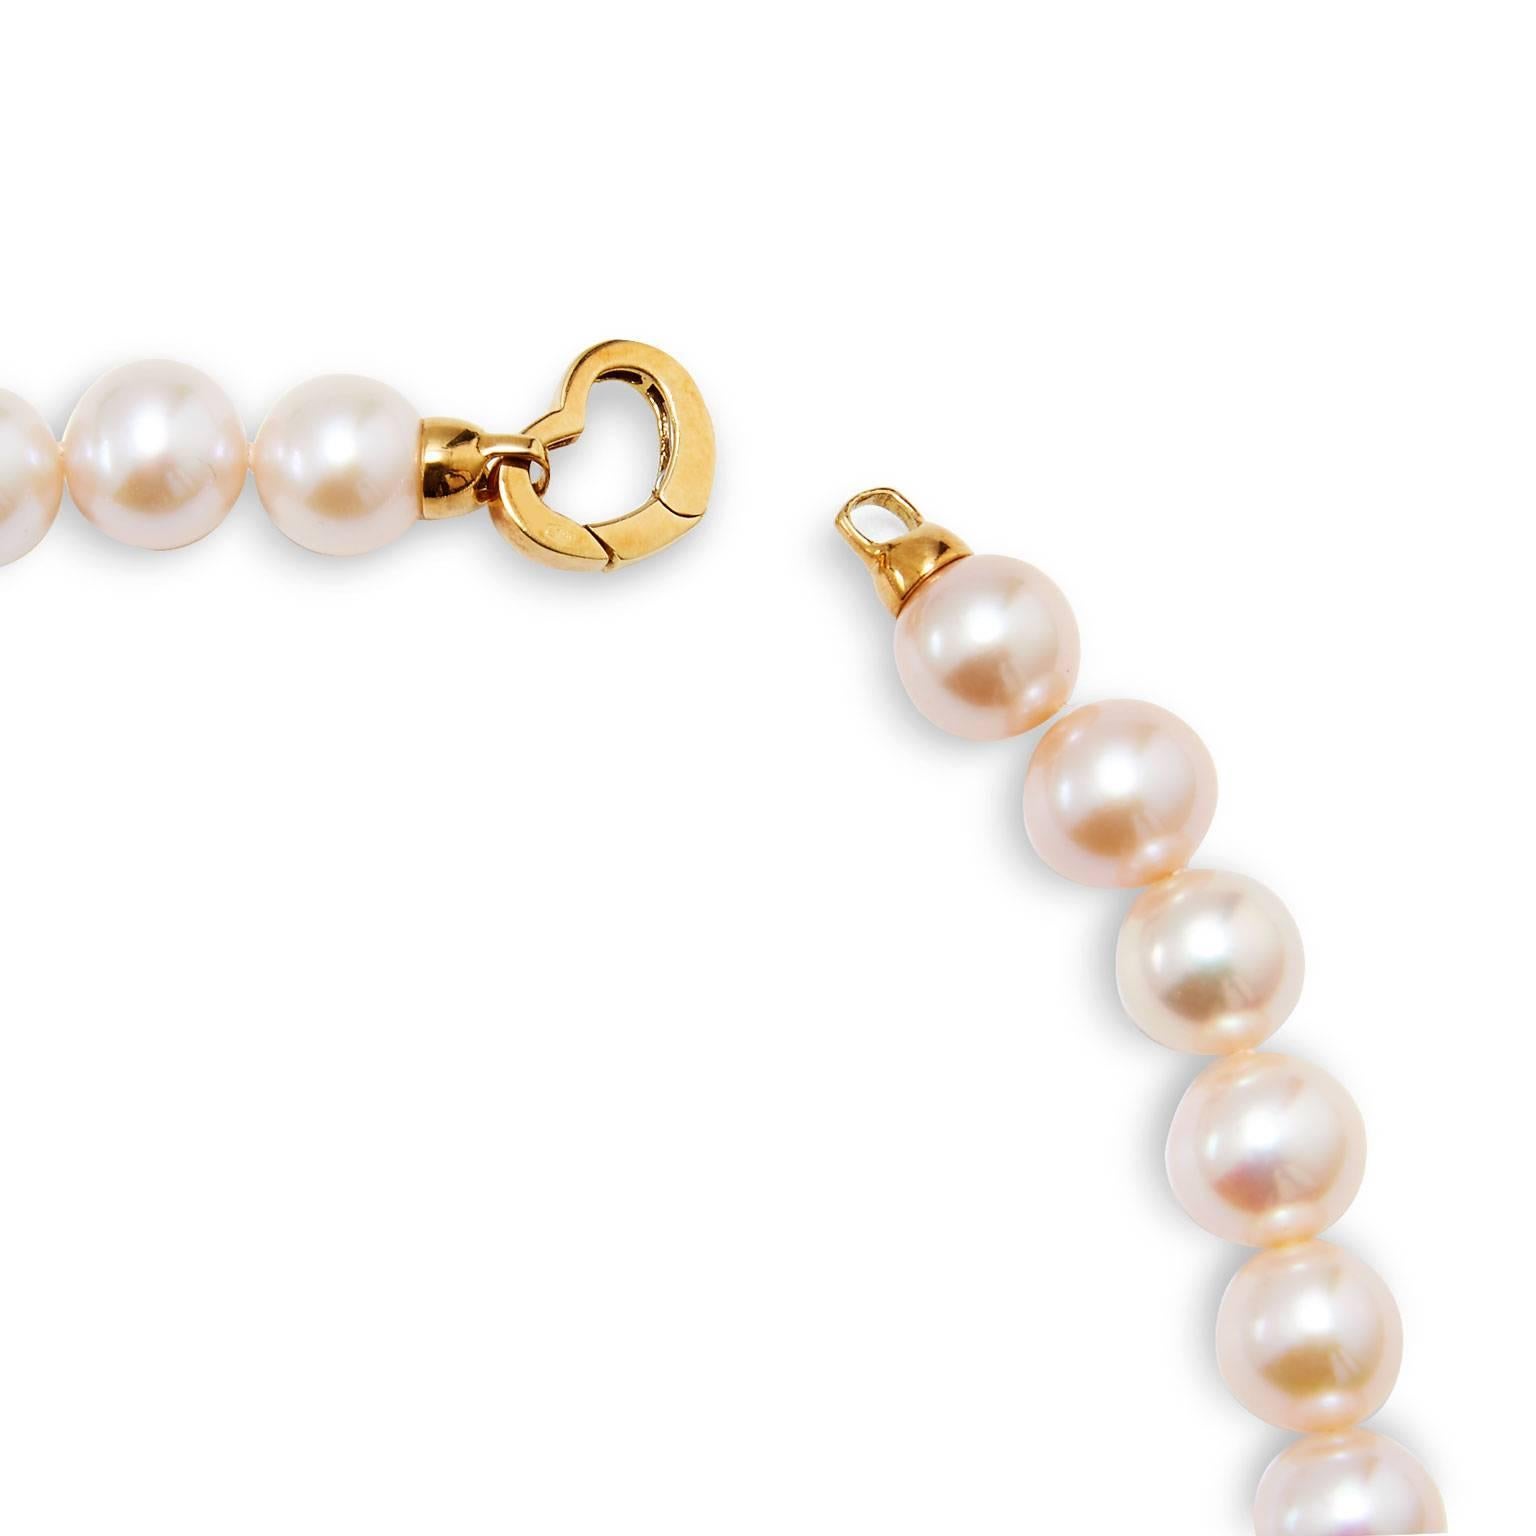 H&H Handmade Fresh Water Pearl Necklace

This is a one of a kind, handmade piece by H & H Jewels.  

This lovely necklace measures 16.5 inches.  (It measures 8 inches when closed and folded in half.)

There are forty-six fresh water pearls,